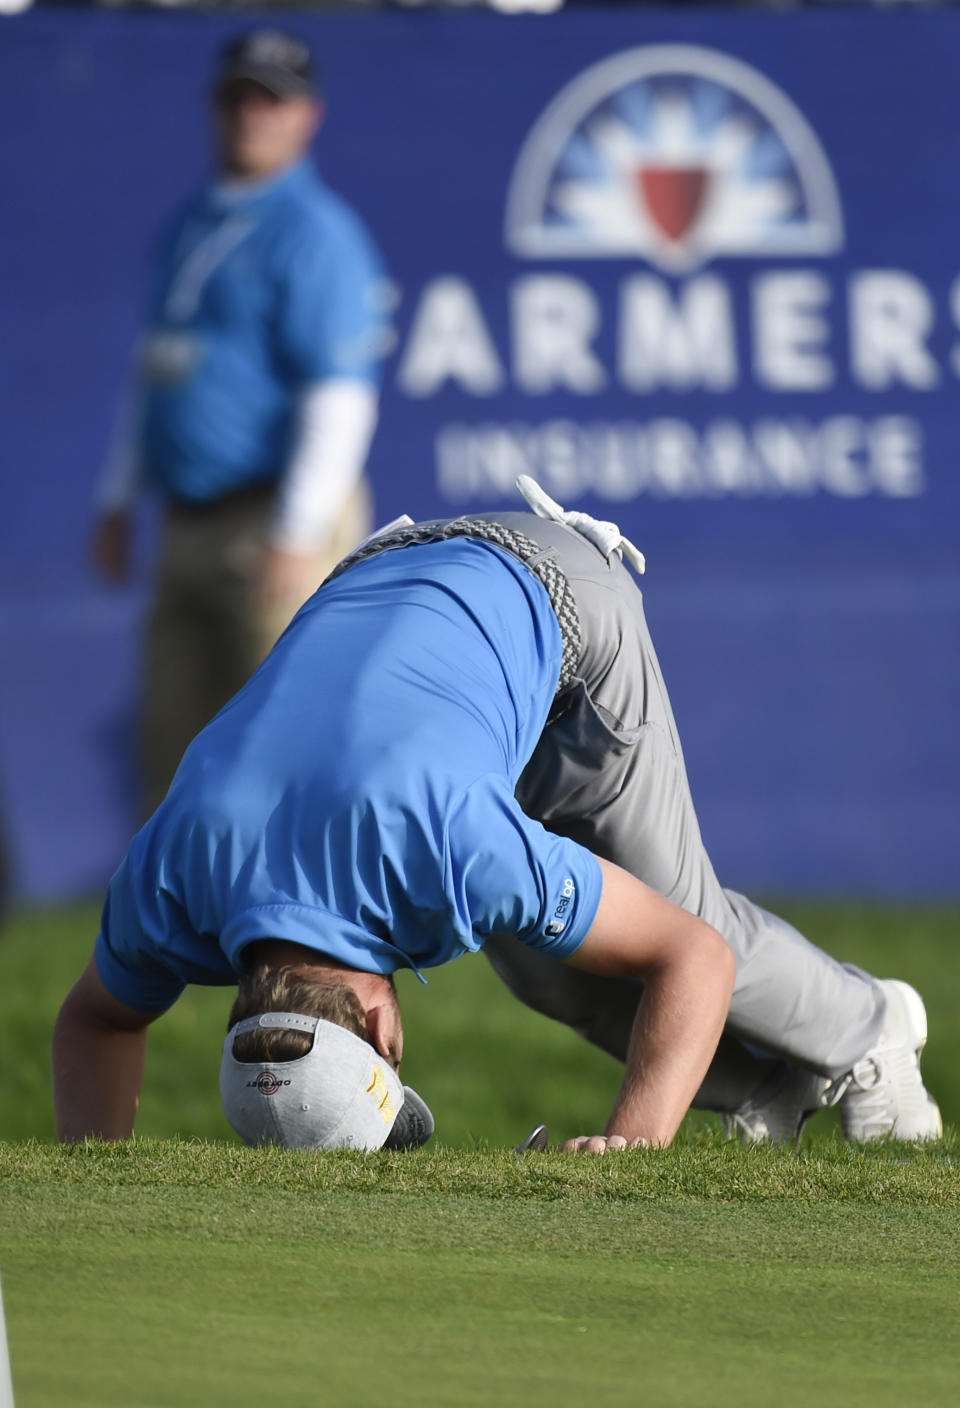 Sebastian Cappelen of Denmark reacts after missing chip shot on the 15th hole of the South Course at Torrey Pines Golf Course during the third round of the Farmers Insurance golf tournament Saturday Jan. 25, 2020, in San Diego. (AP Photo/Denis Poroy)